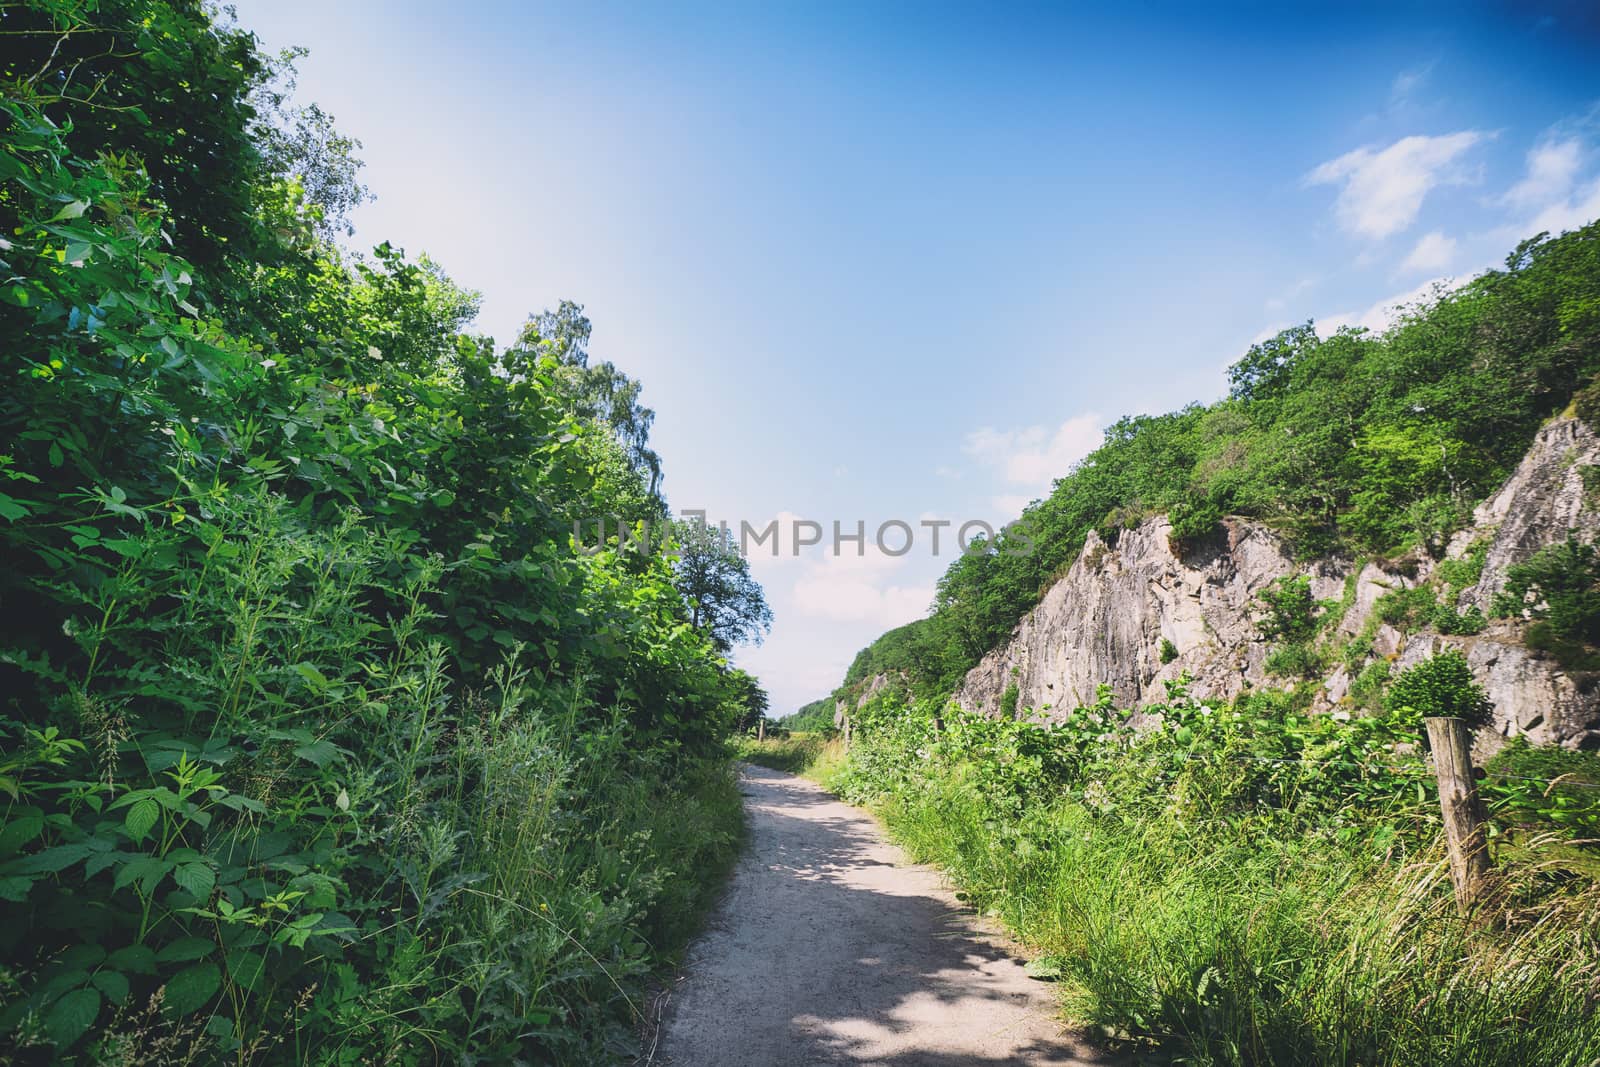 Hiking trail surrounded på cliffs and trees under a blue sky in the summer